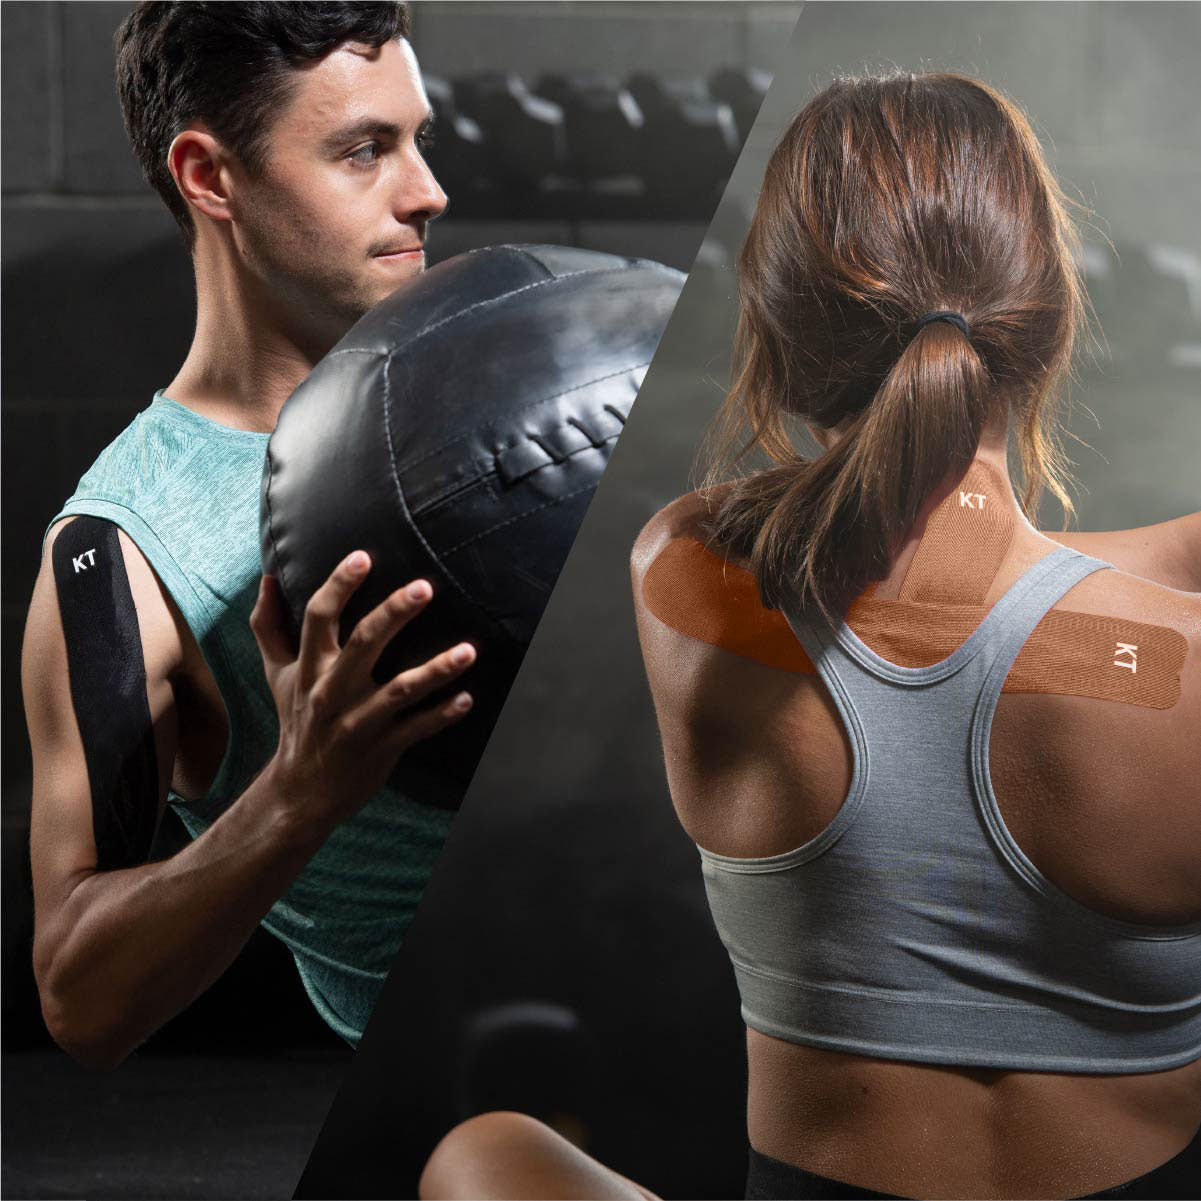 KT tape is the best kinesiology tape for knee and shoulder pain due to working out